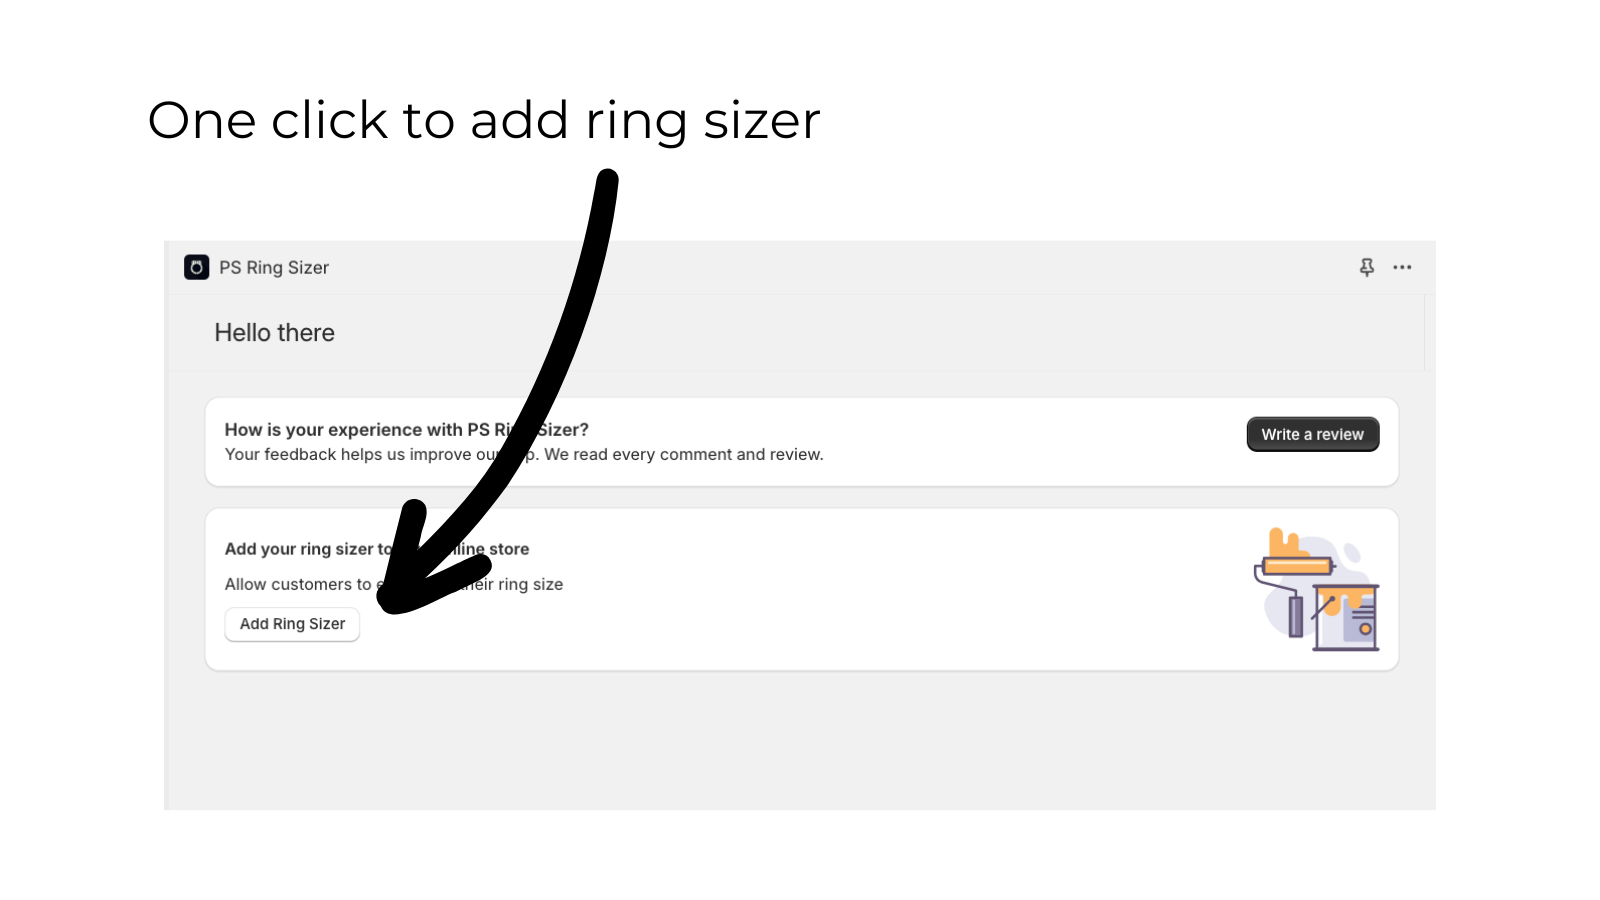 Add Ring Sizer from Admin dashboard